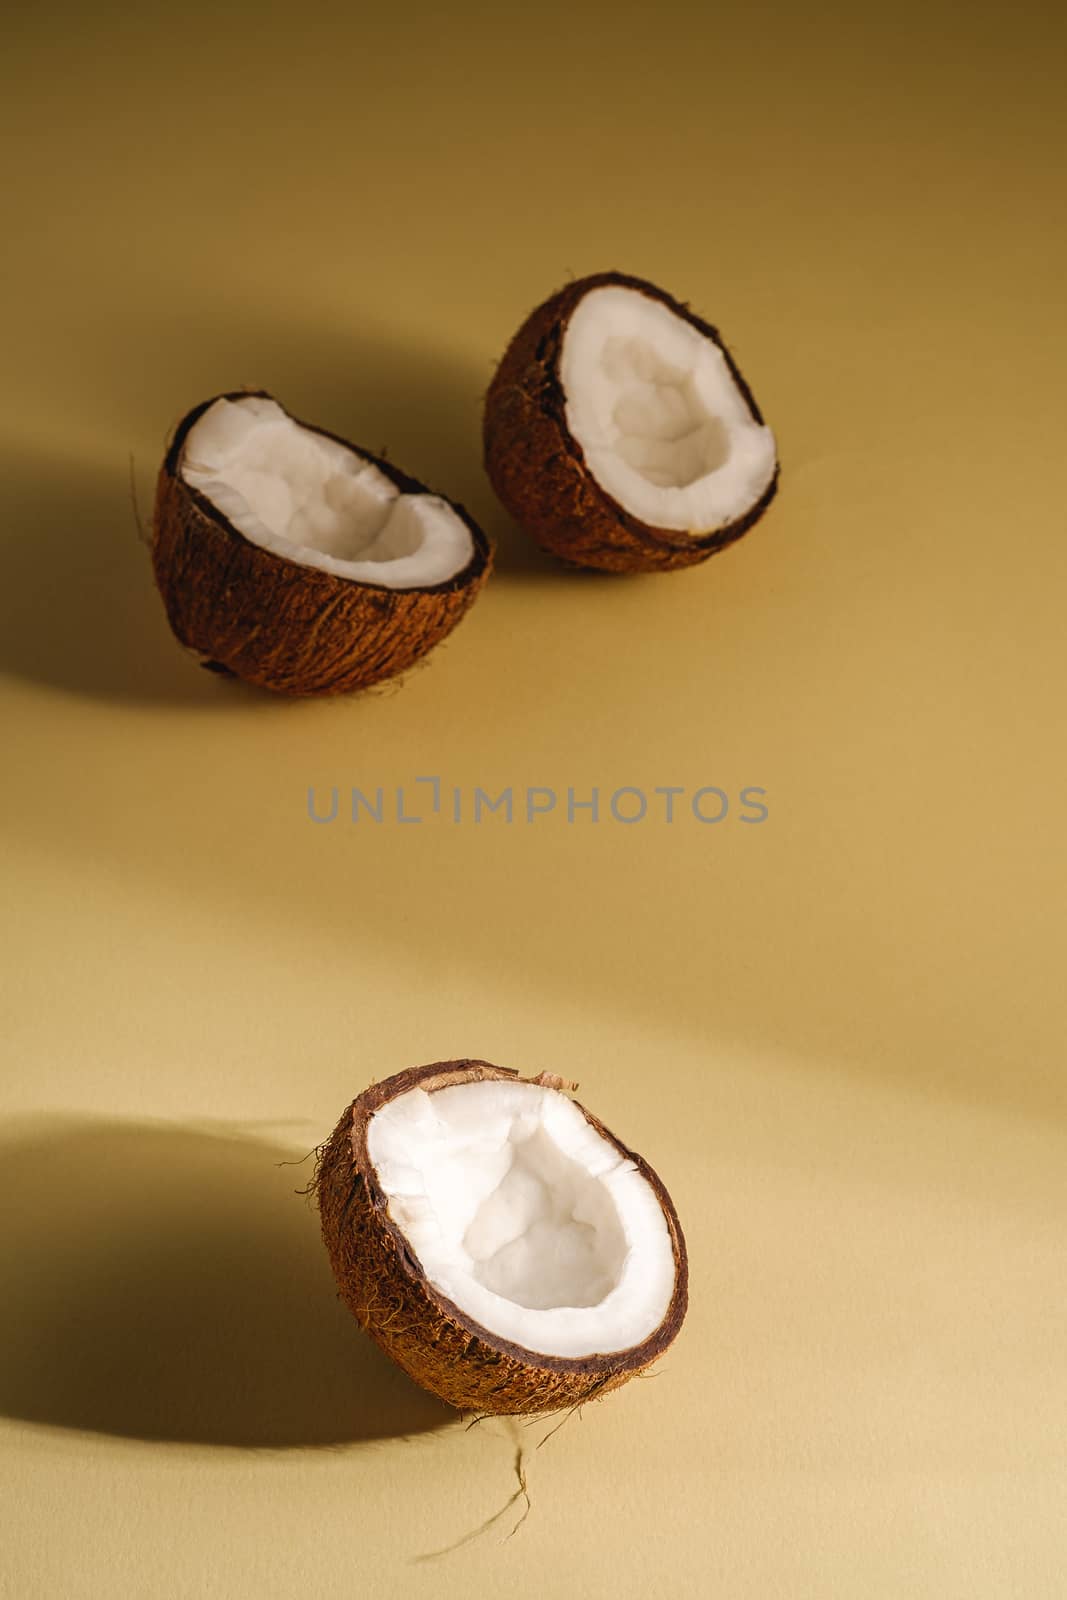 Coconut fruits on cream yellow plain background by Frostroomhead